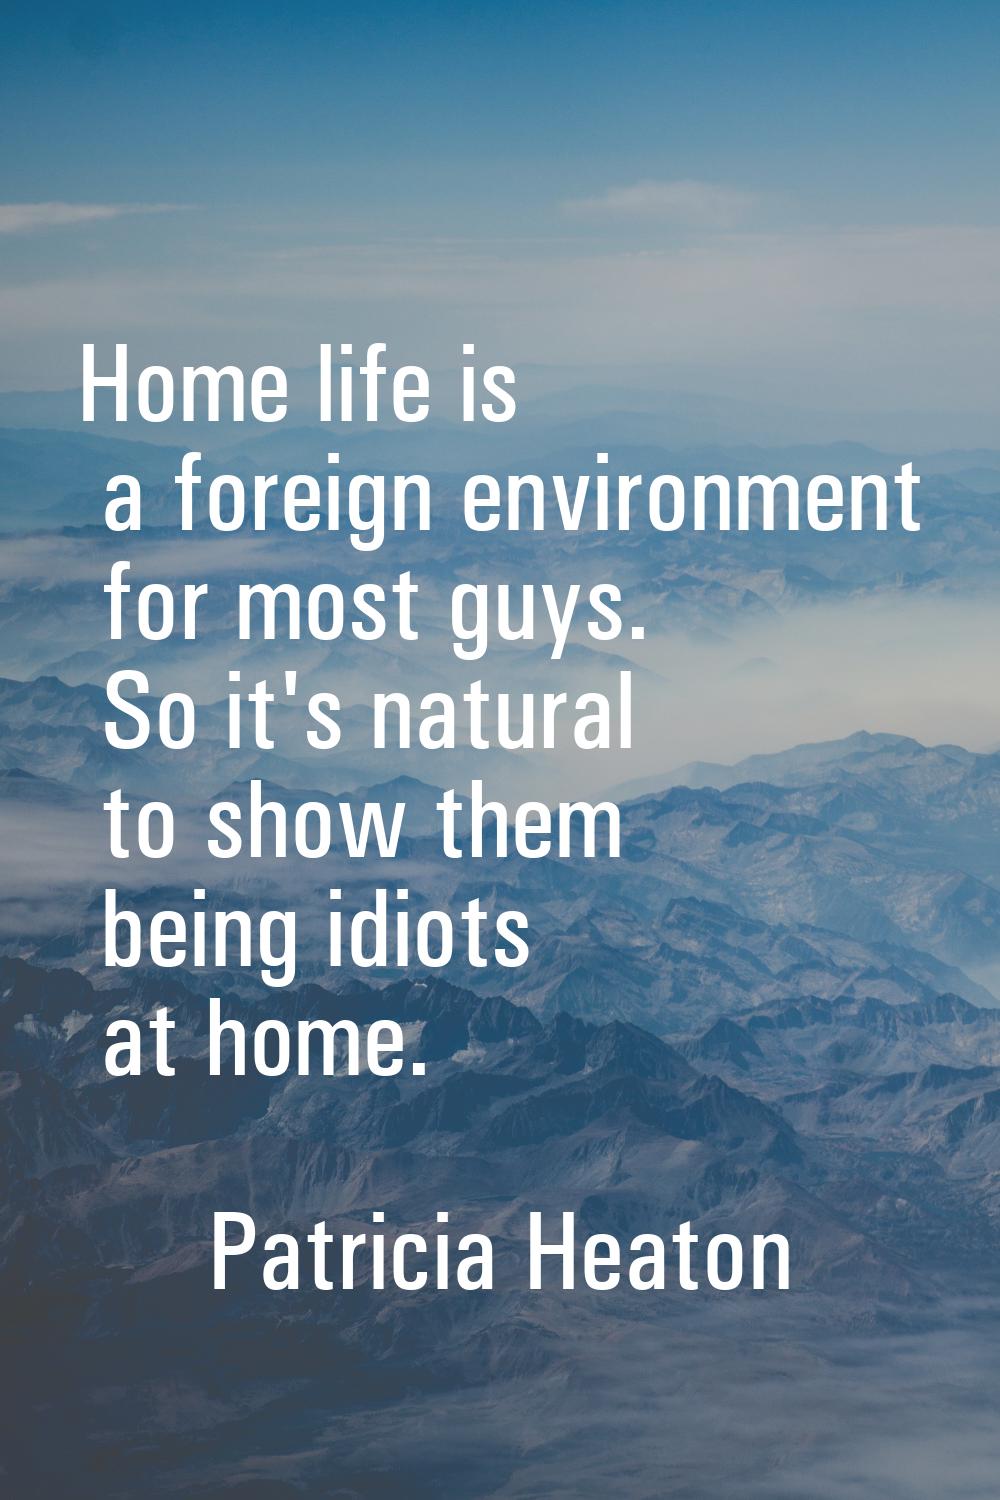 Home life is a foreign environment for most guys. So it's natural to show them being idiots at home